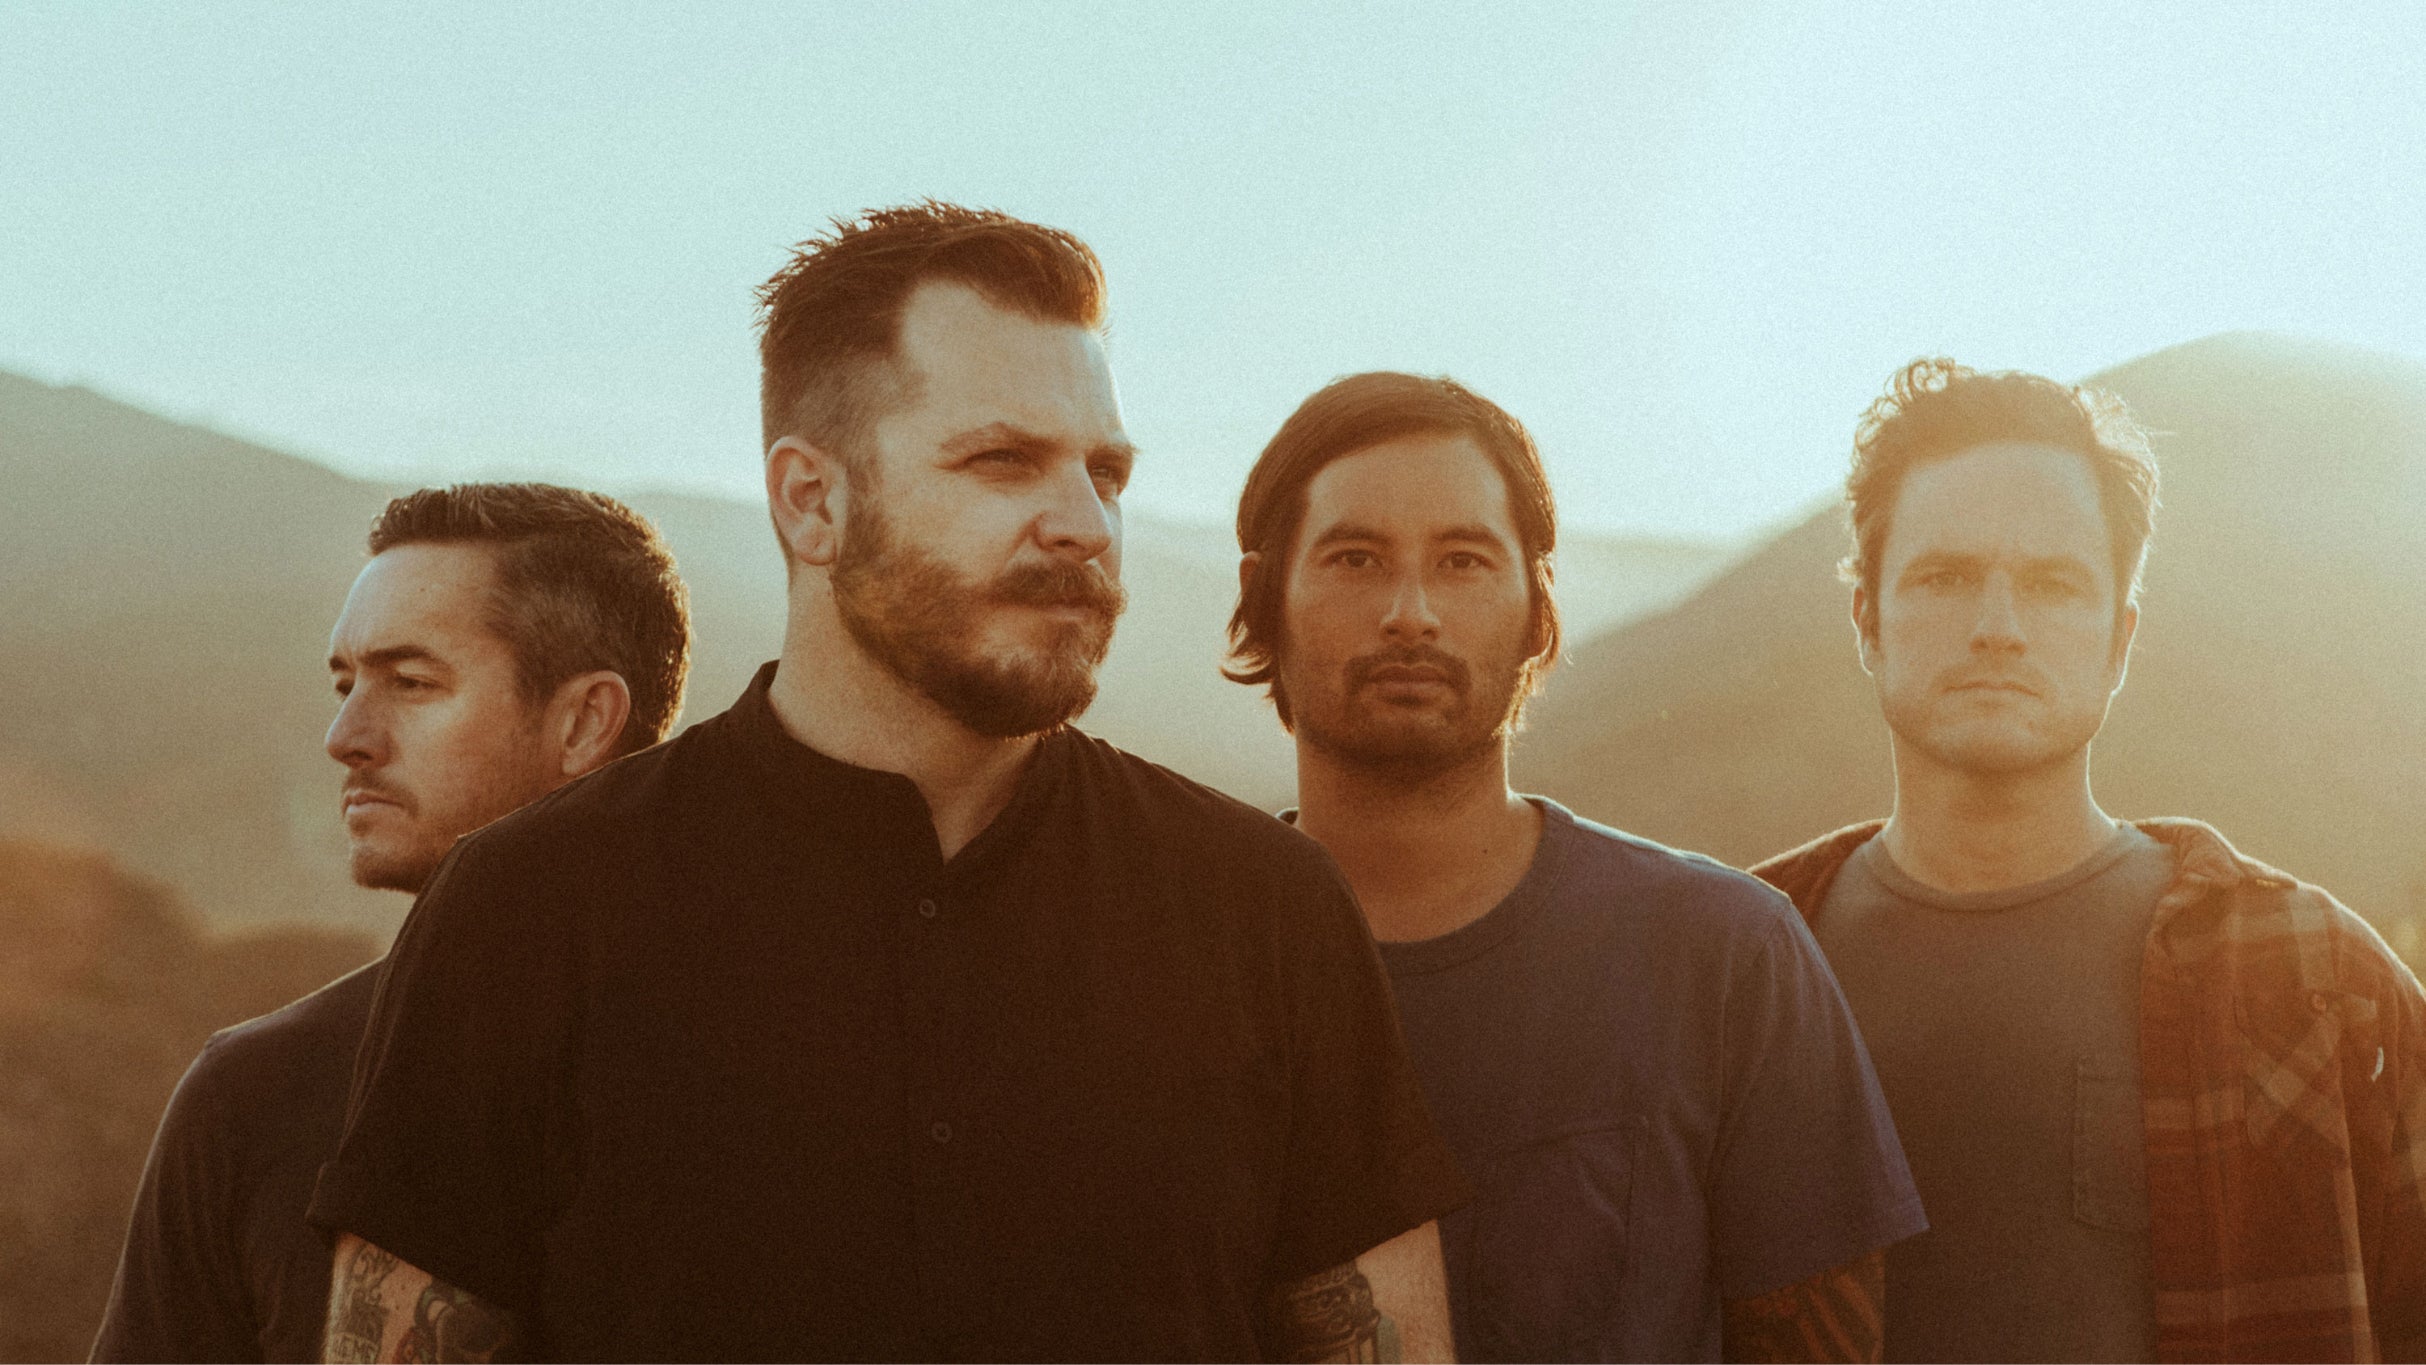 Thrice - The Artist In The Ambulance 20th Anniversary Tour